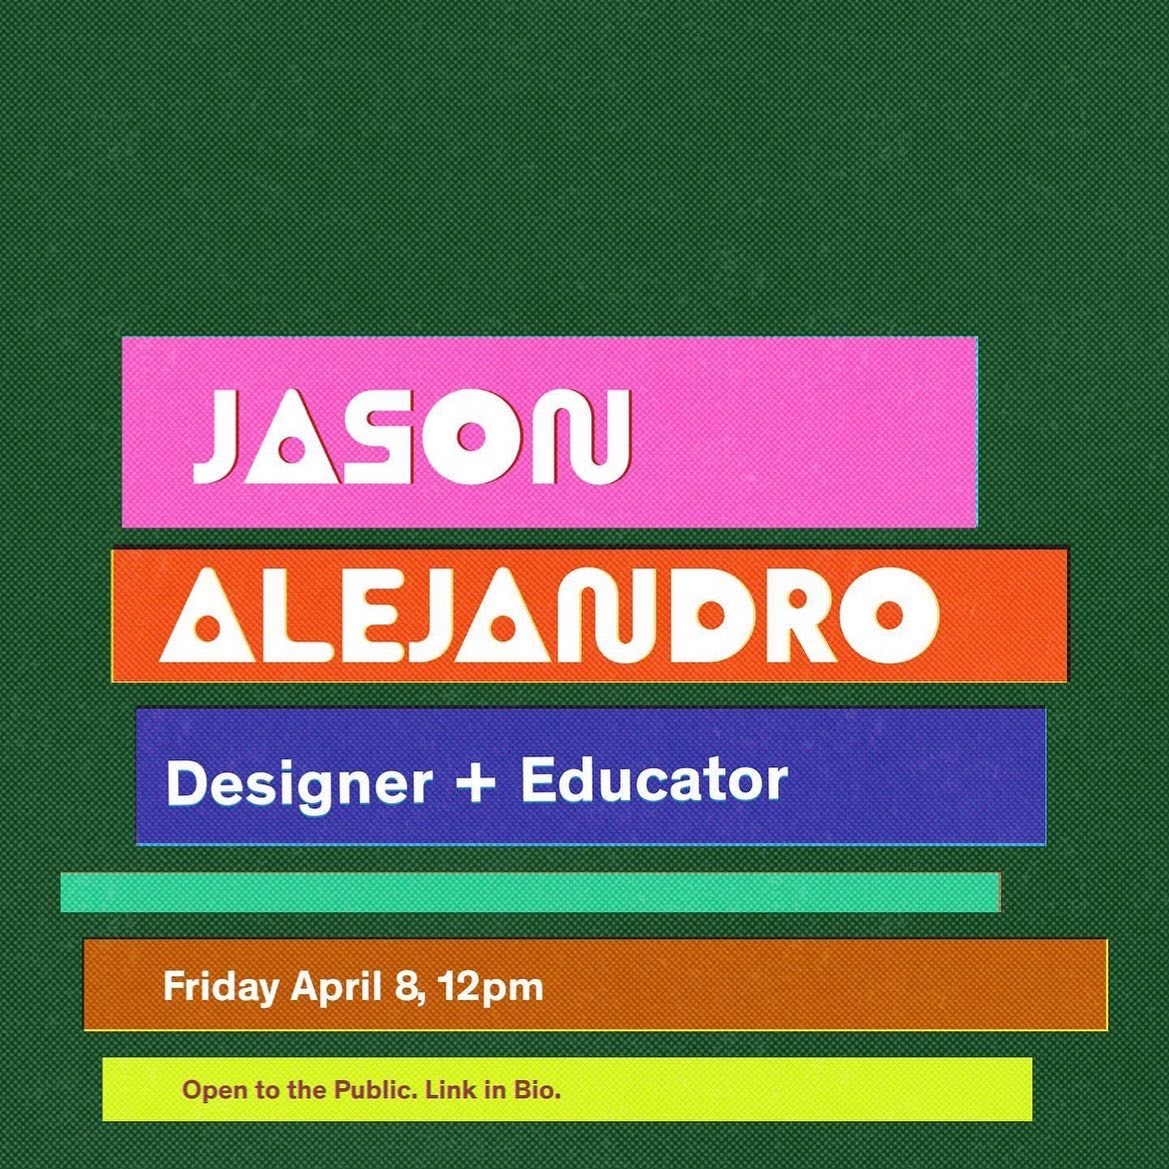 Colorful poster for Jason Alejandro , Designer + Educator at MICA. There are flourecent and brightly colored rectangles that look like a stack of books.